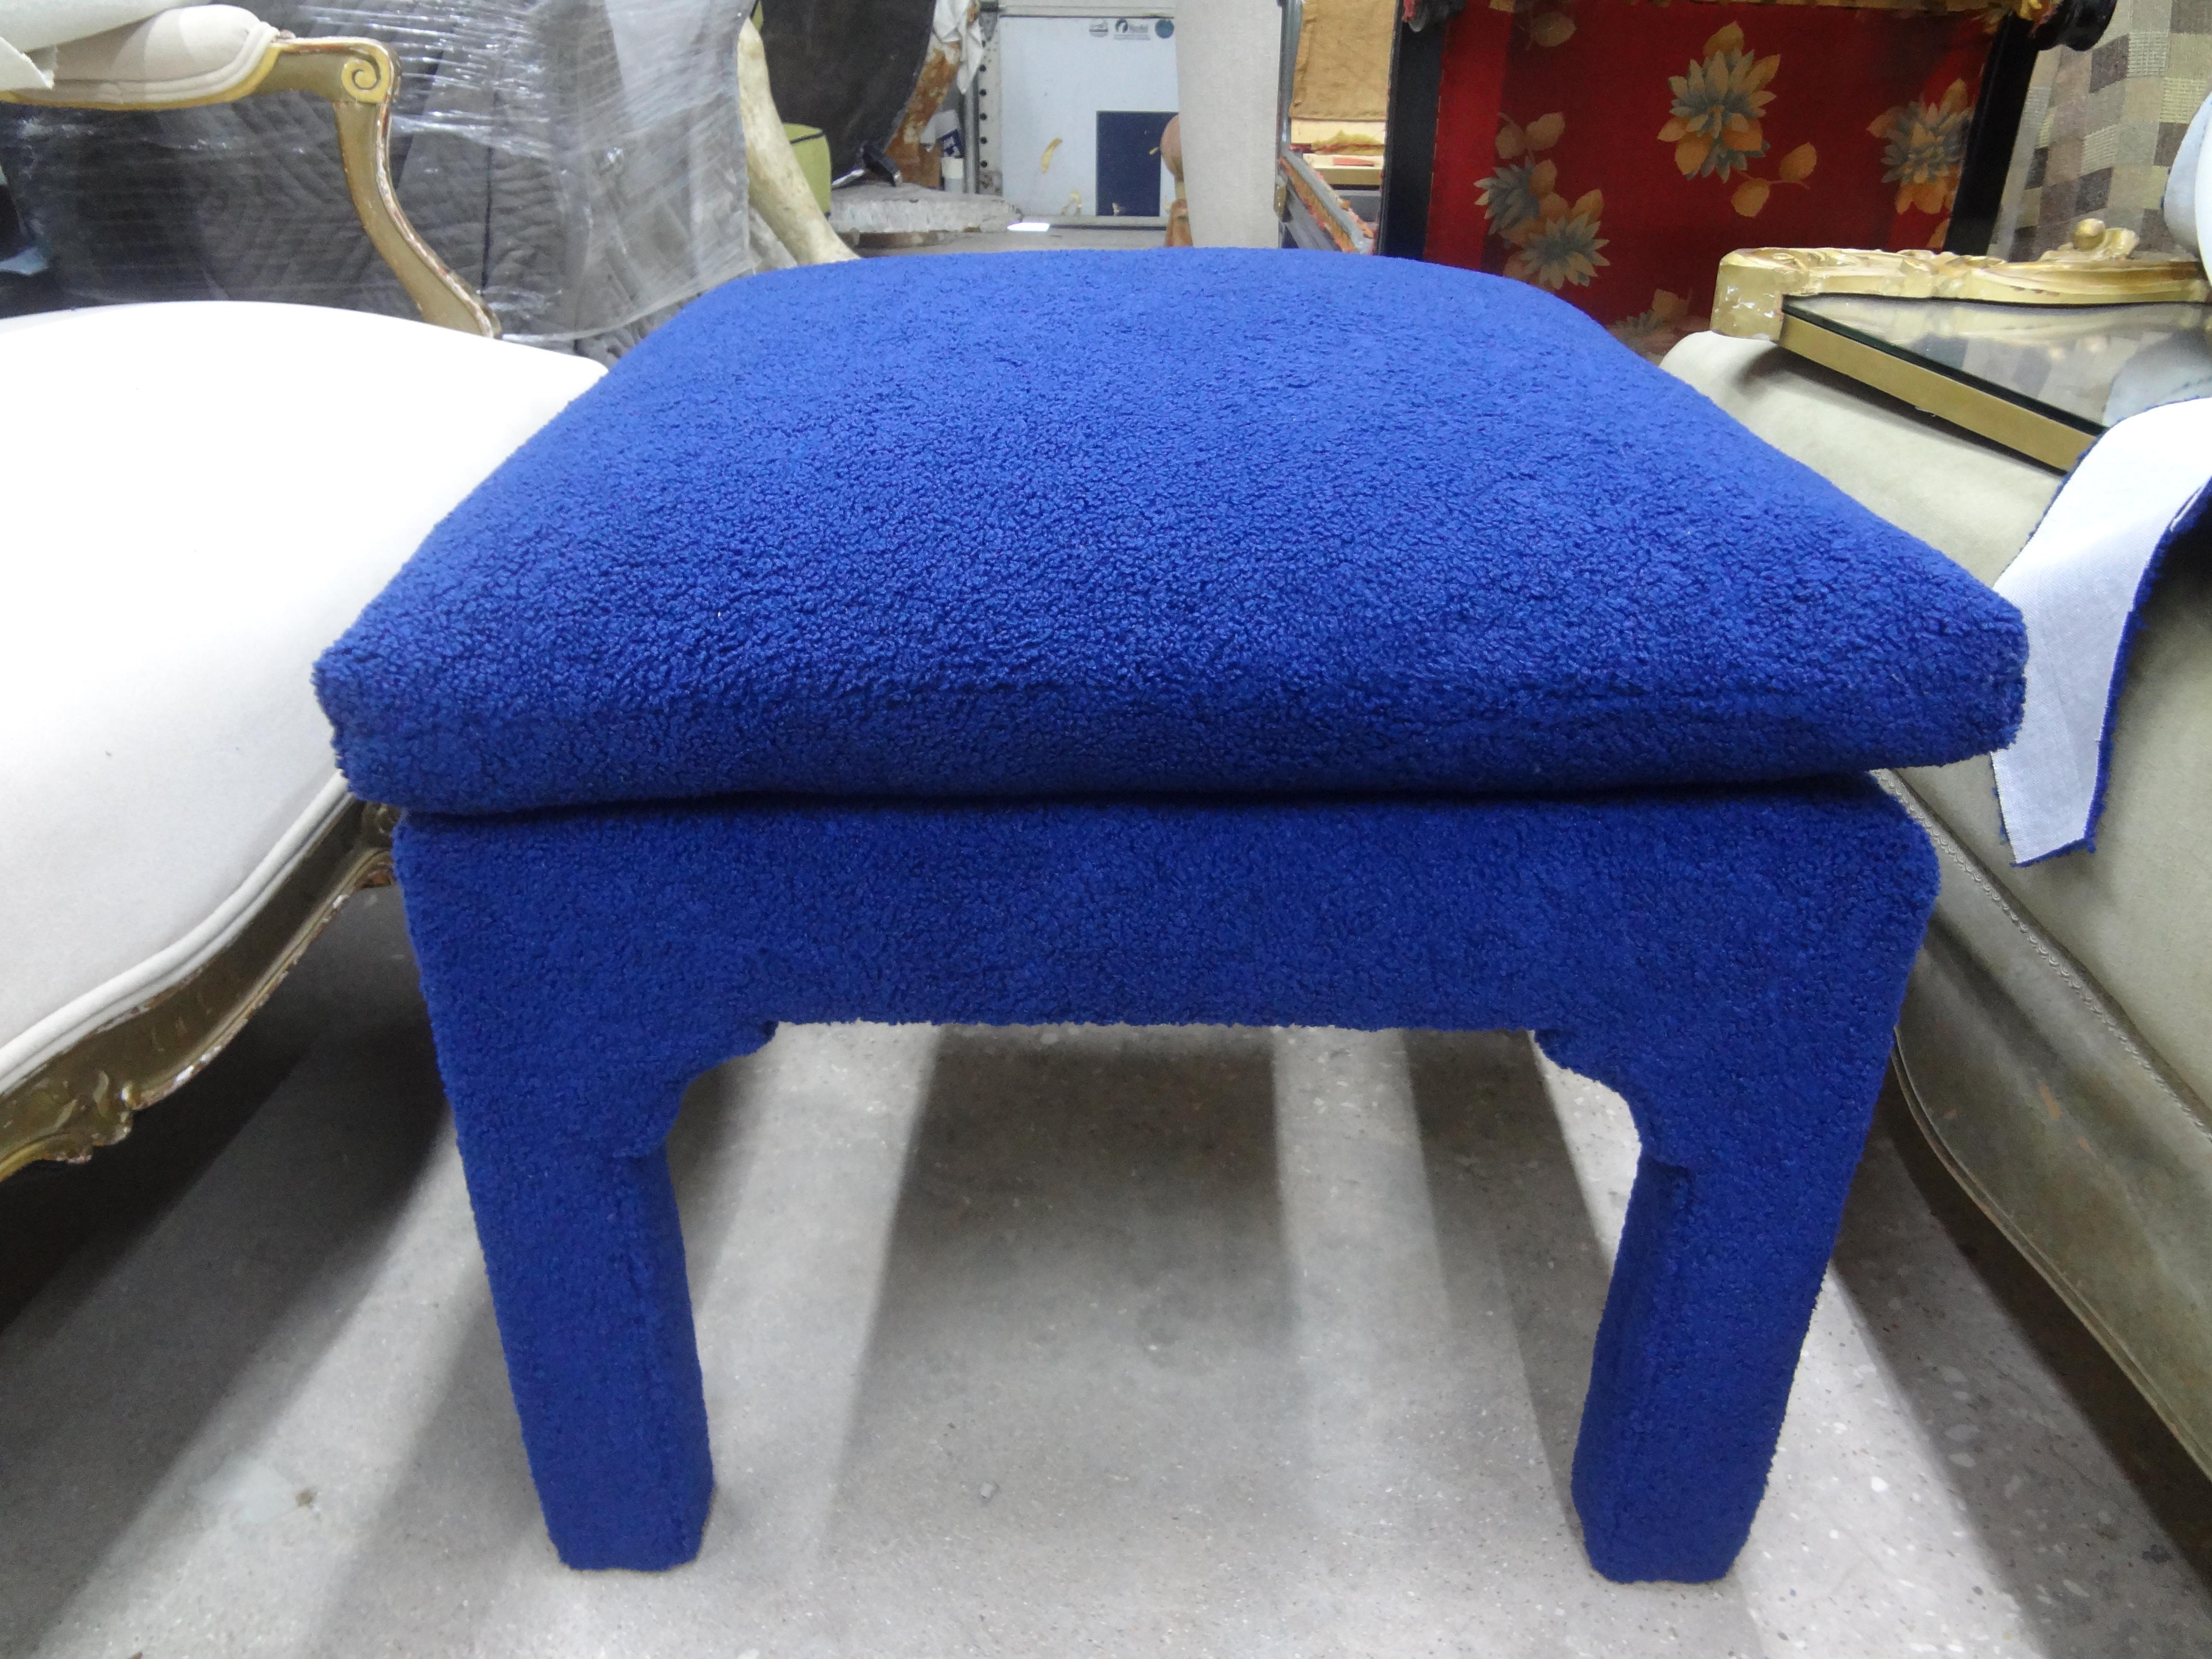 Midcentury Milo Baughman style Parsons ottoman.
Stunning midcentury Milo Baughman Parsons style upholstered ottoman. This gorgeous Hollywood Regency Parsons ottoman, bench or stool has been professionally upholstered in a plush blue bouclé fabric.